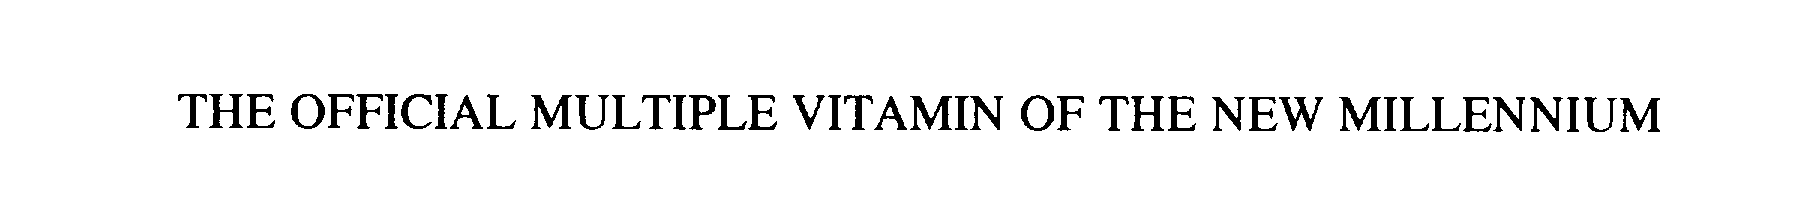  THE OFFICIAL MULTIPLE VITAMIN OF THE NEW MILLENNIUM